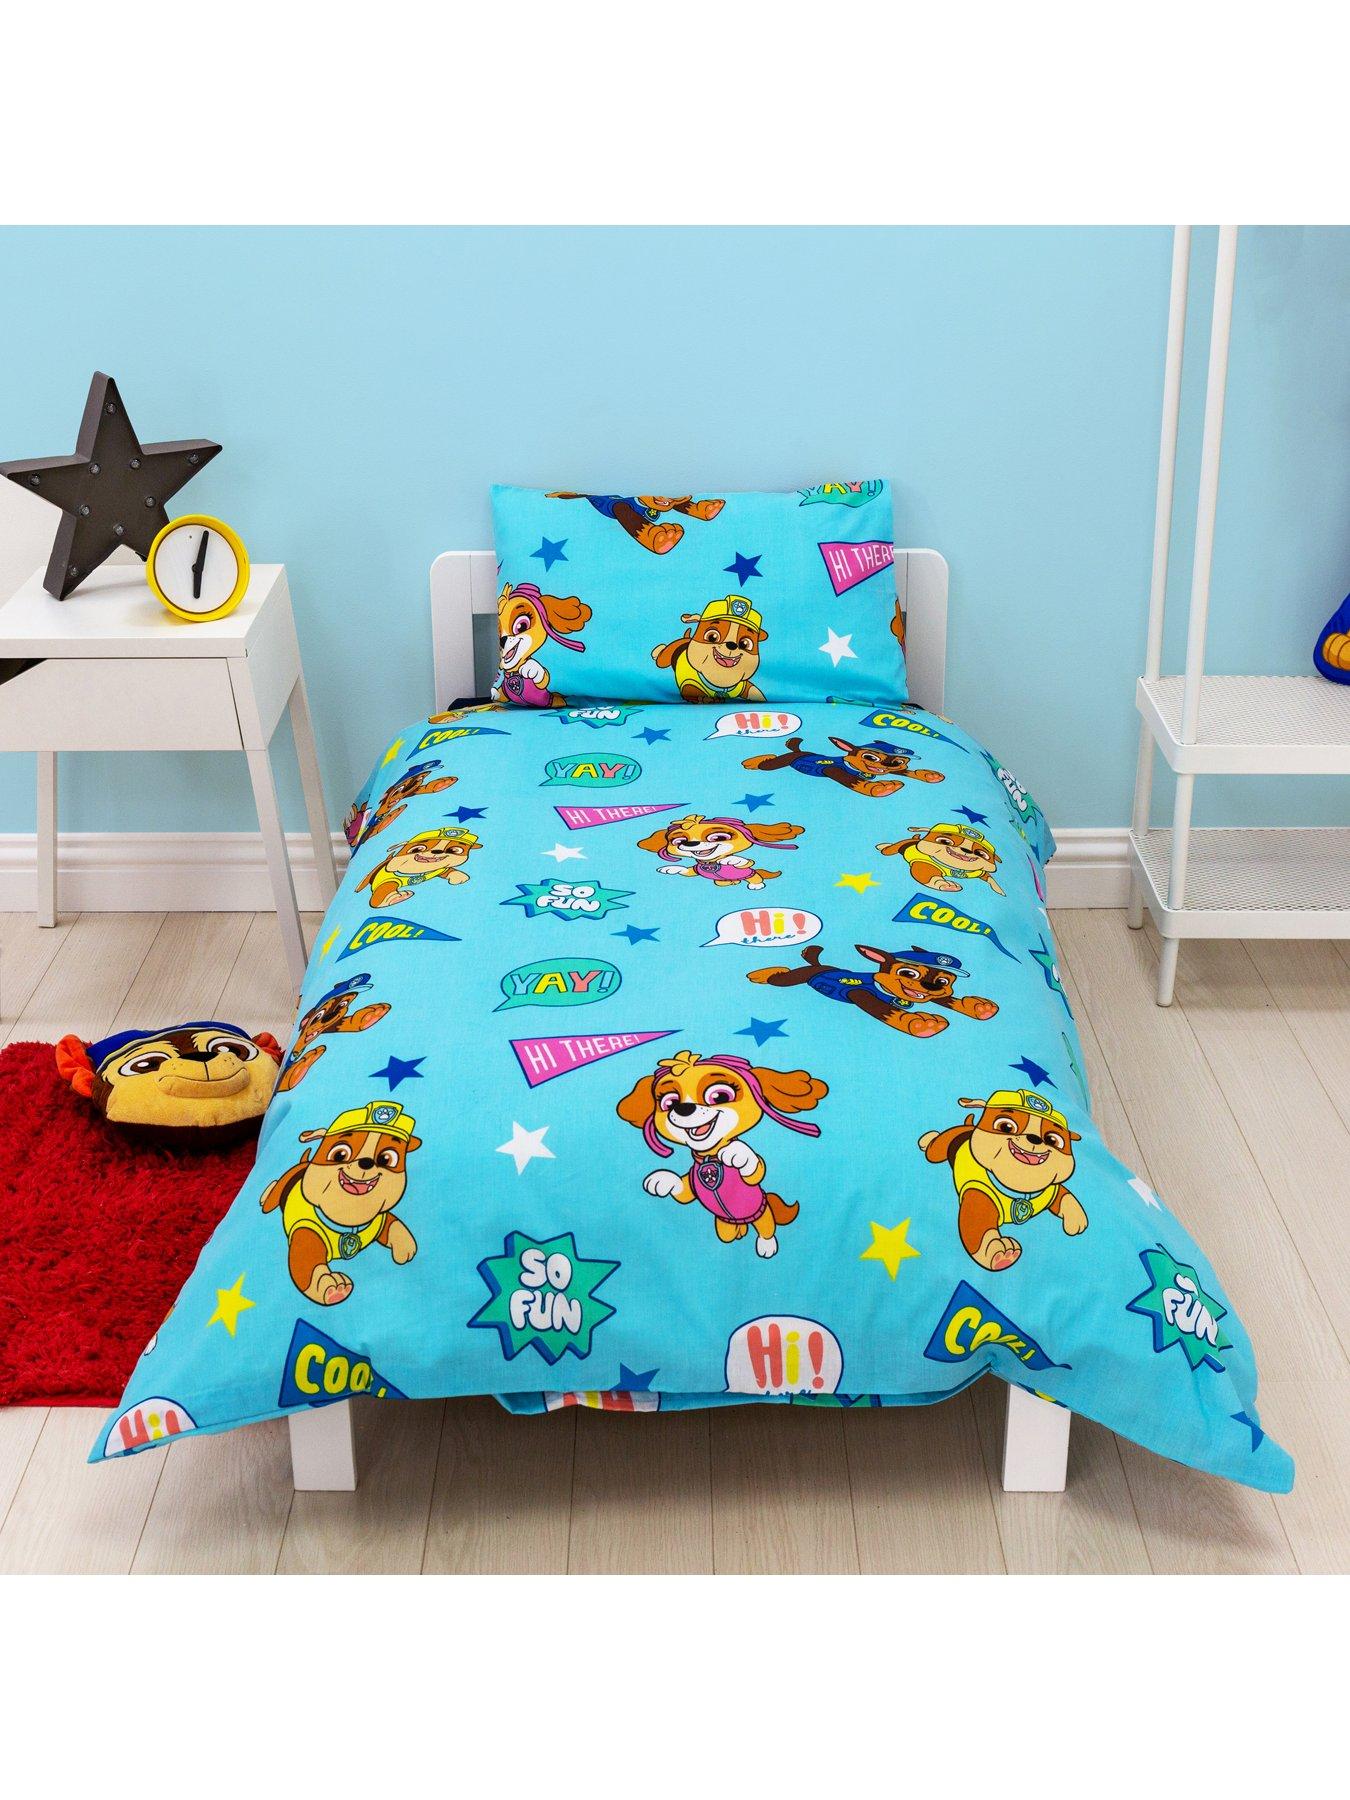 Non-Down Comforter Kids Bedding Sets Full Details about   Kids Bedding Sets Twin Bed Sheets 